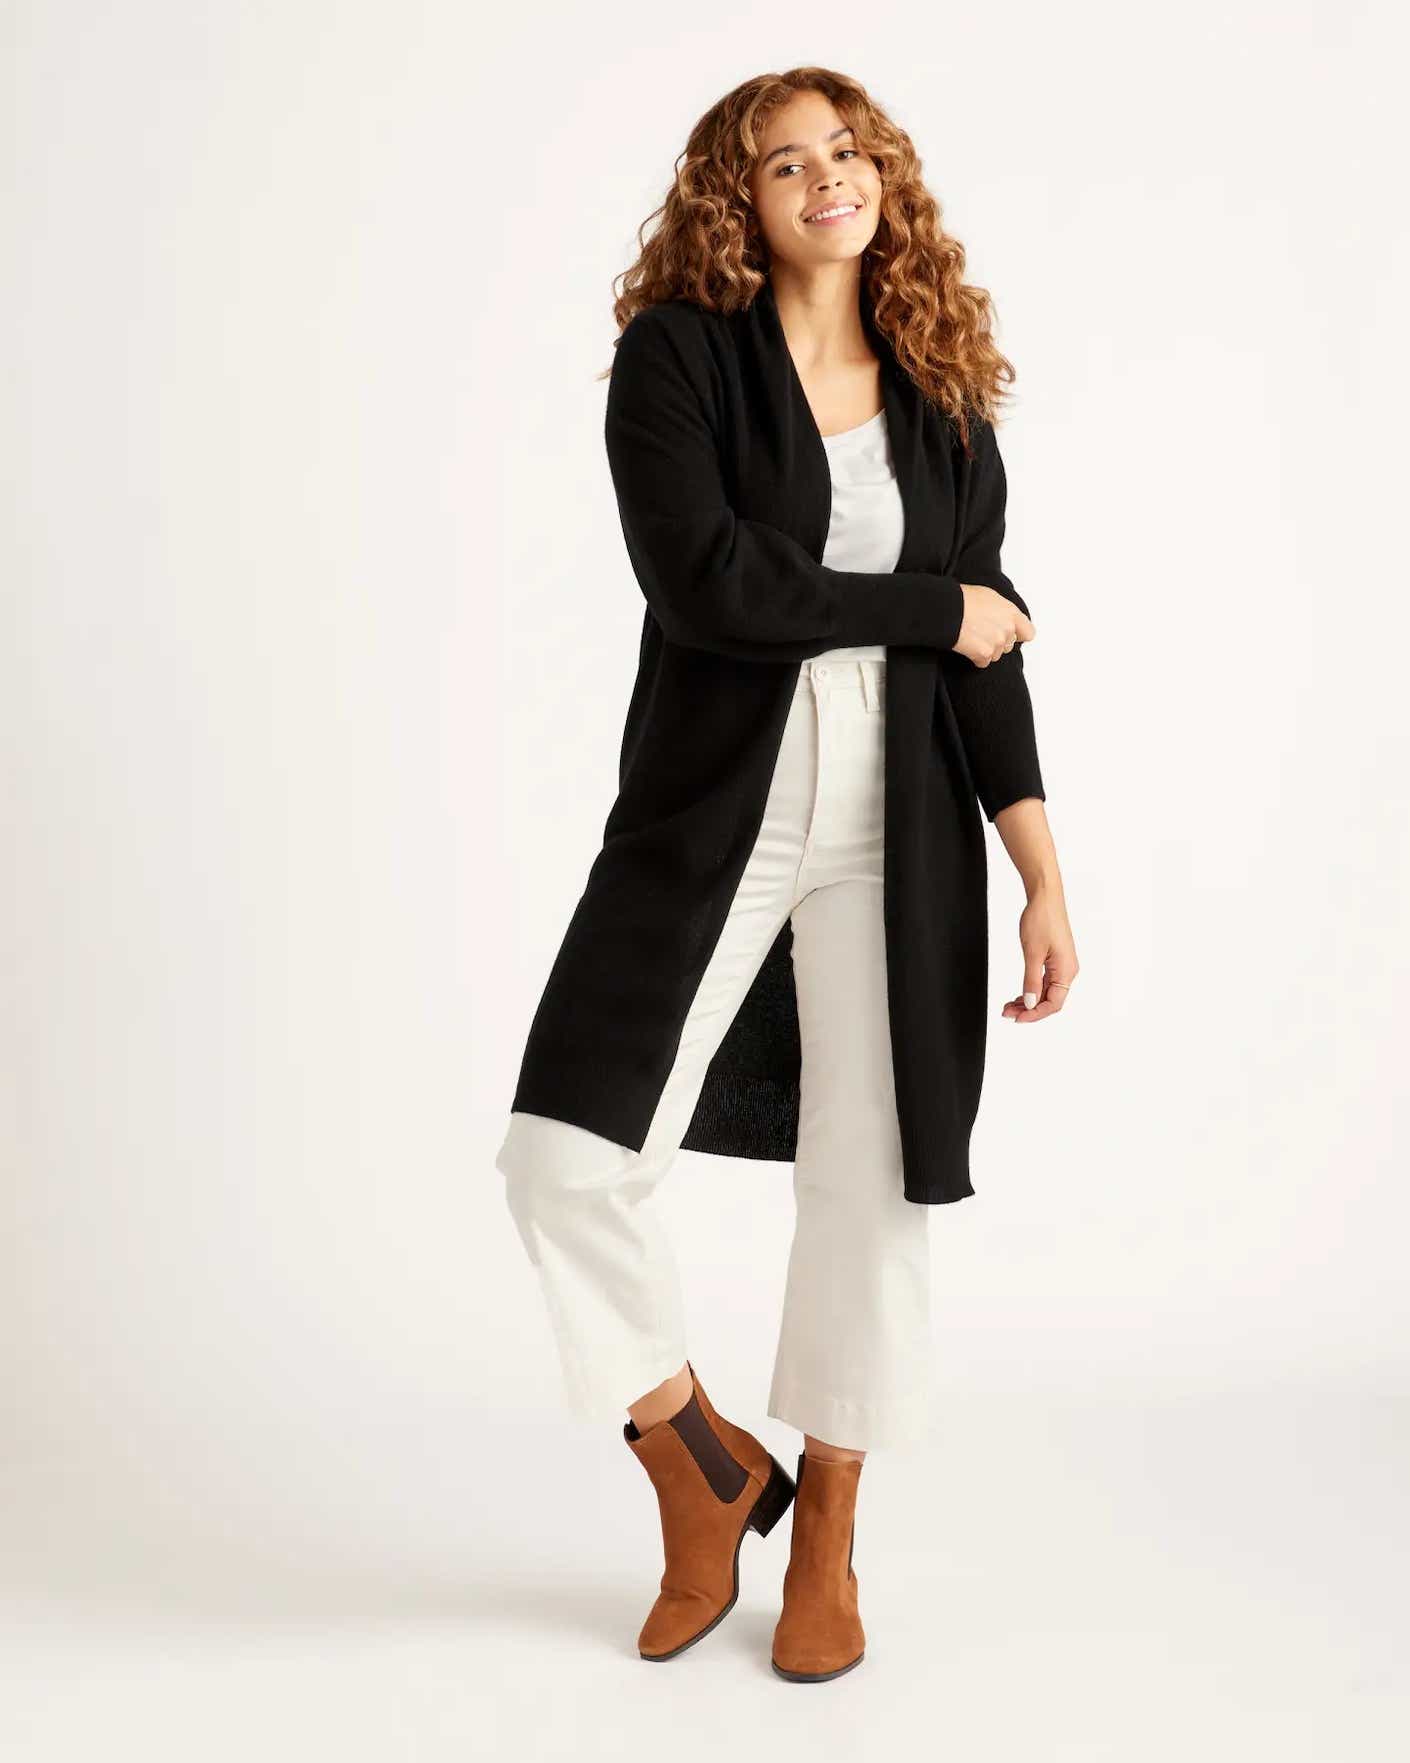 A knee-length black sweater duster is pictured on a relaxed looking woman.